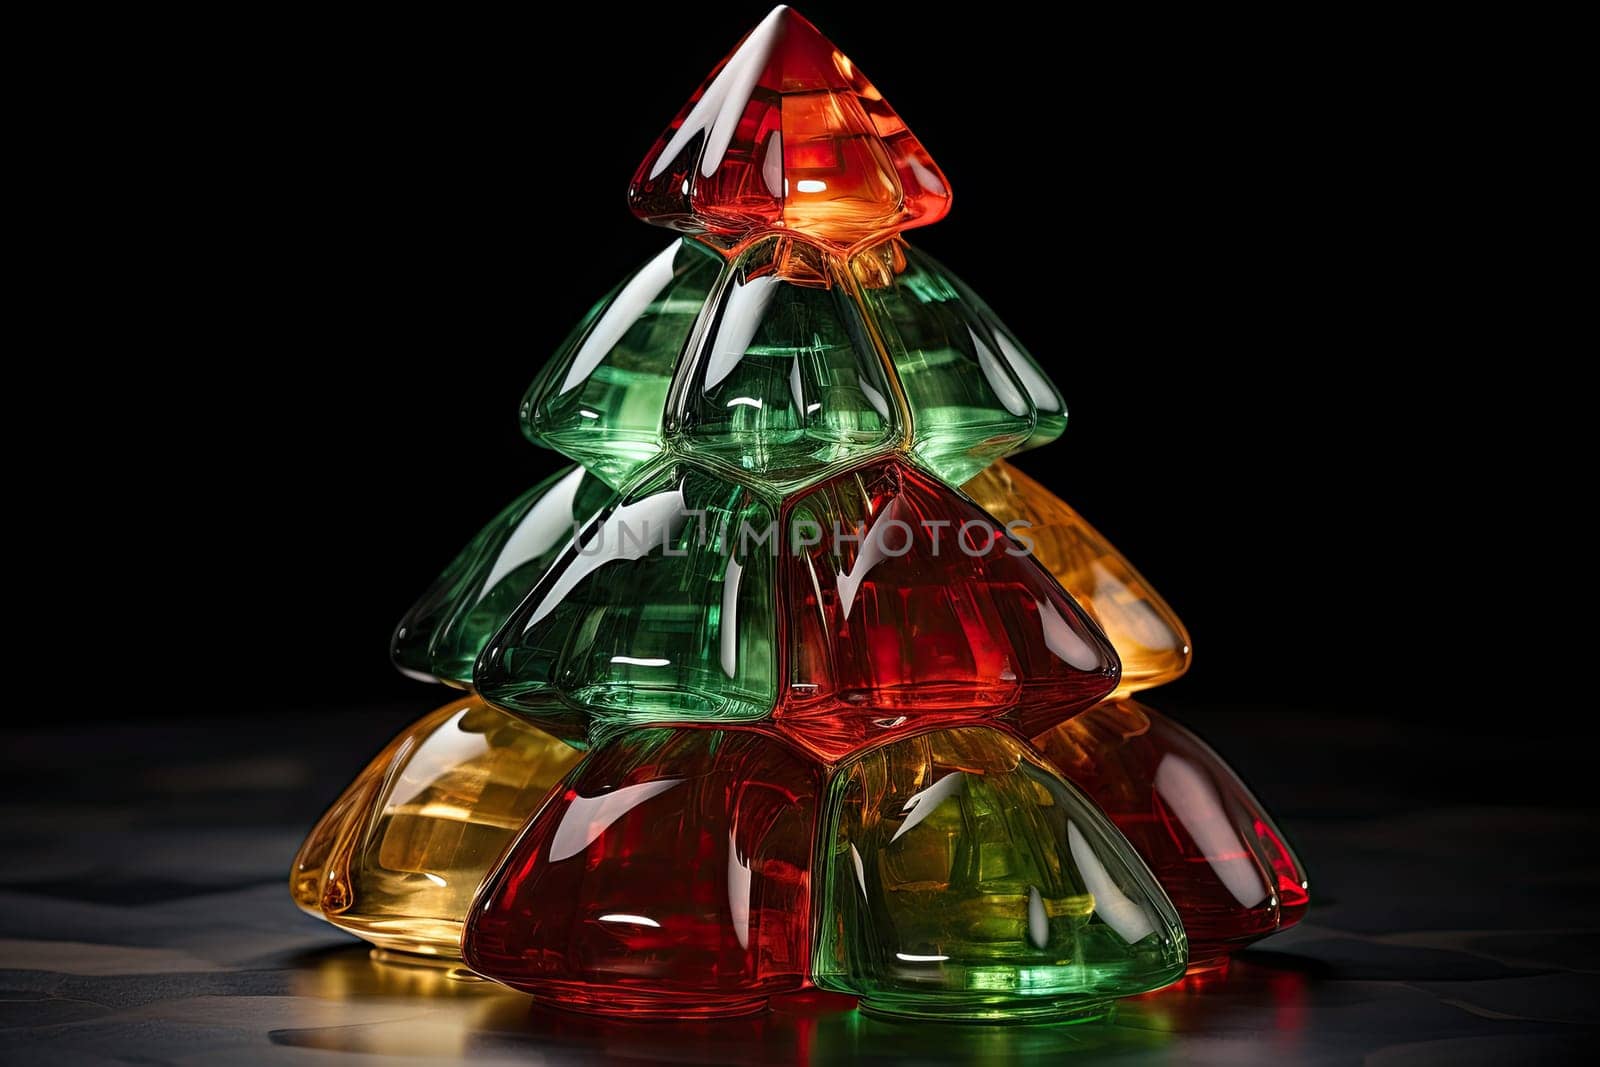 A Festive Display of a Multicolored Glass Christmas Tree on a Table